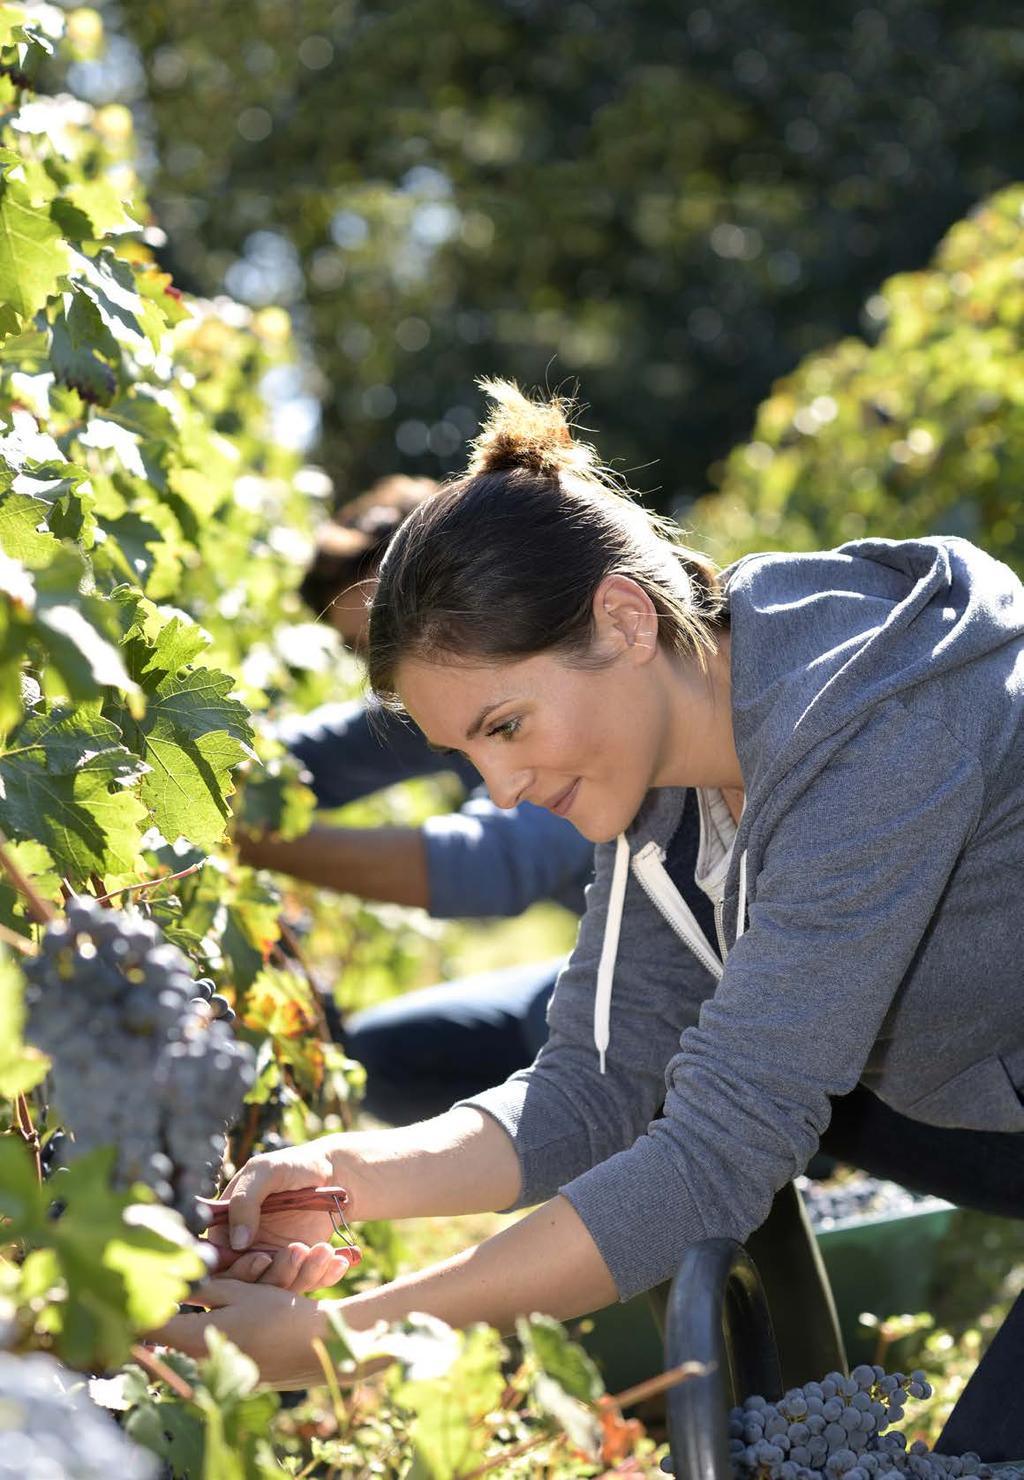 Wineries risk management guide Helping our customers